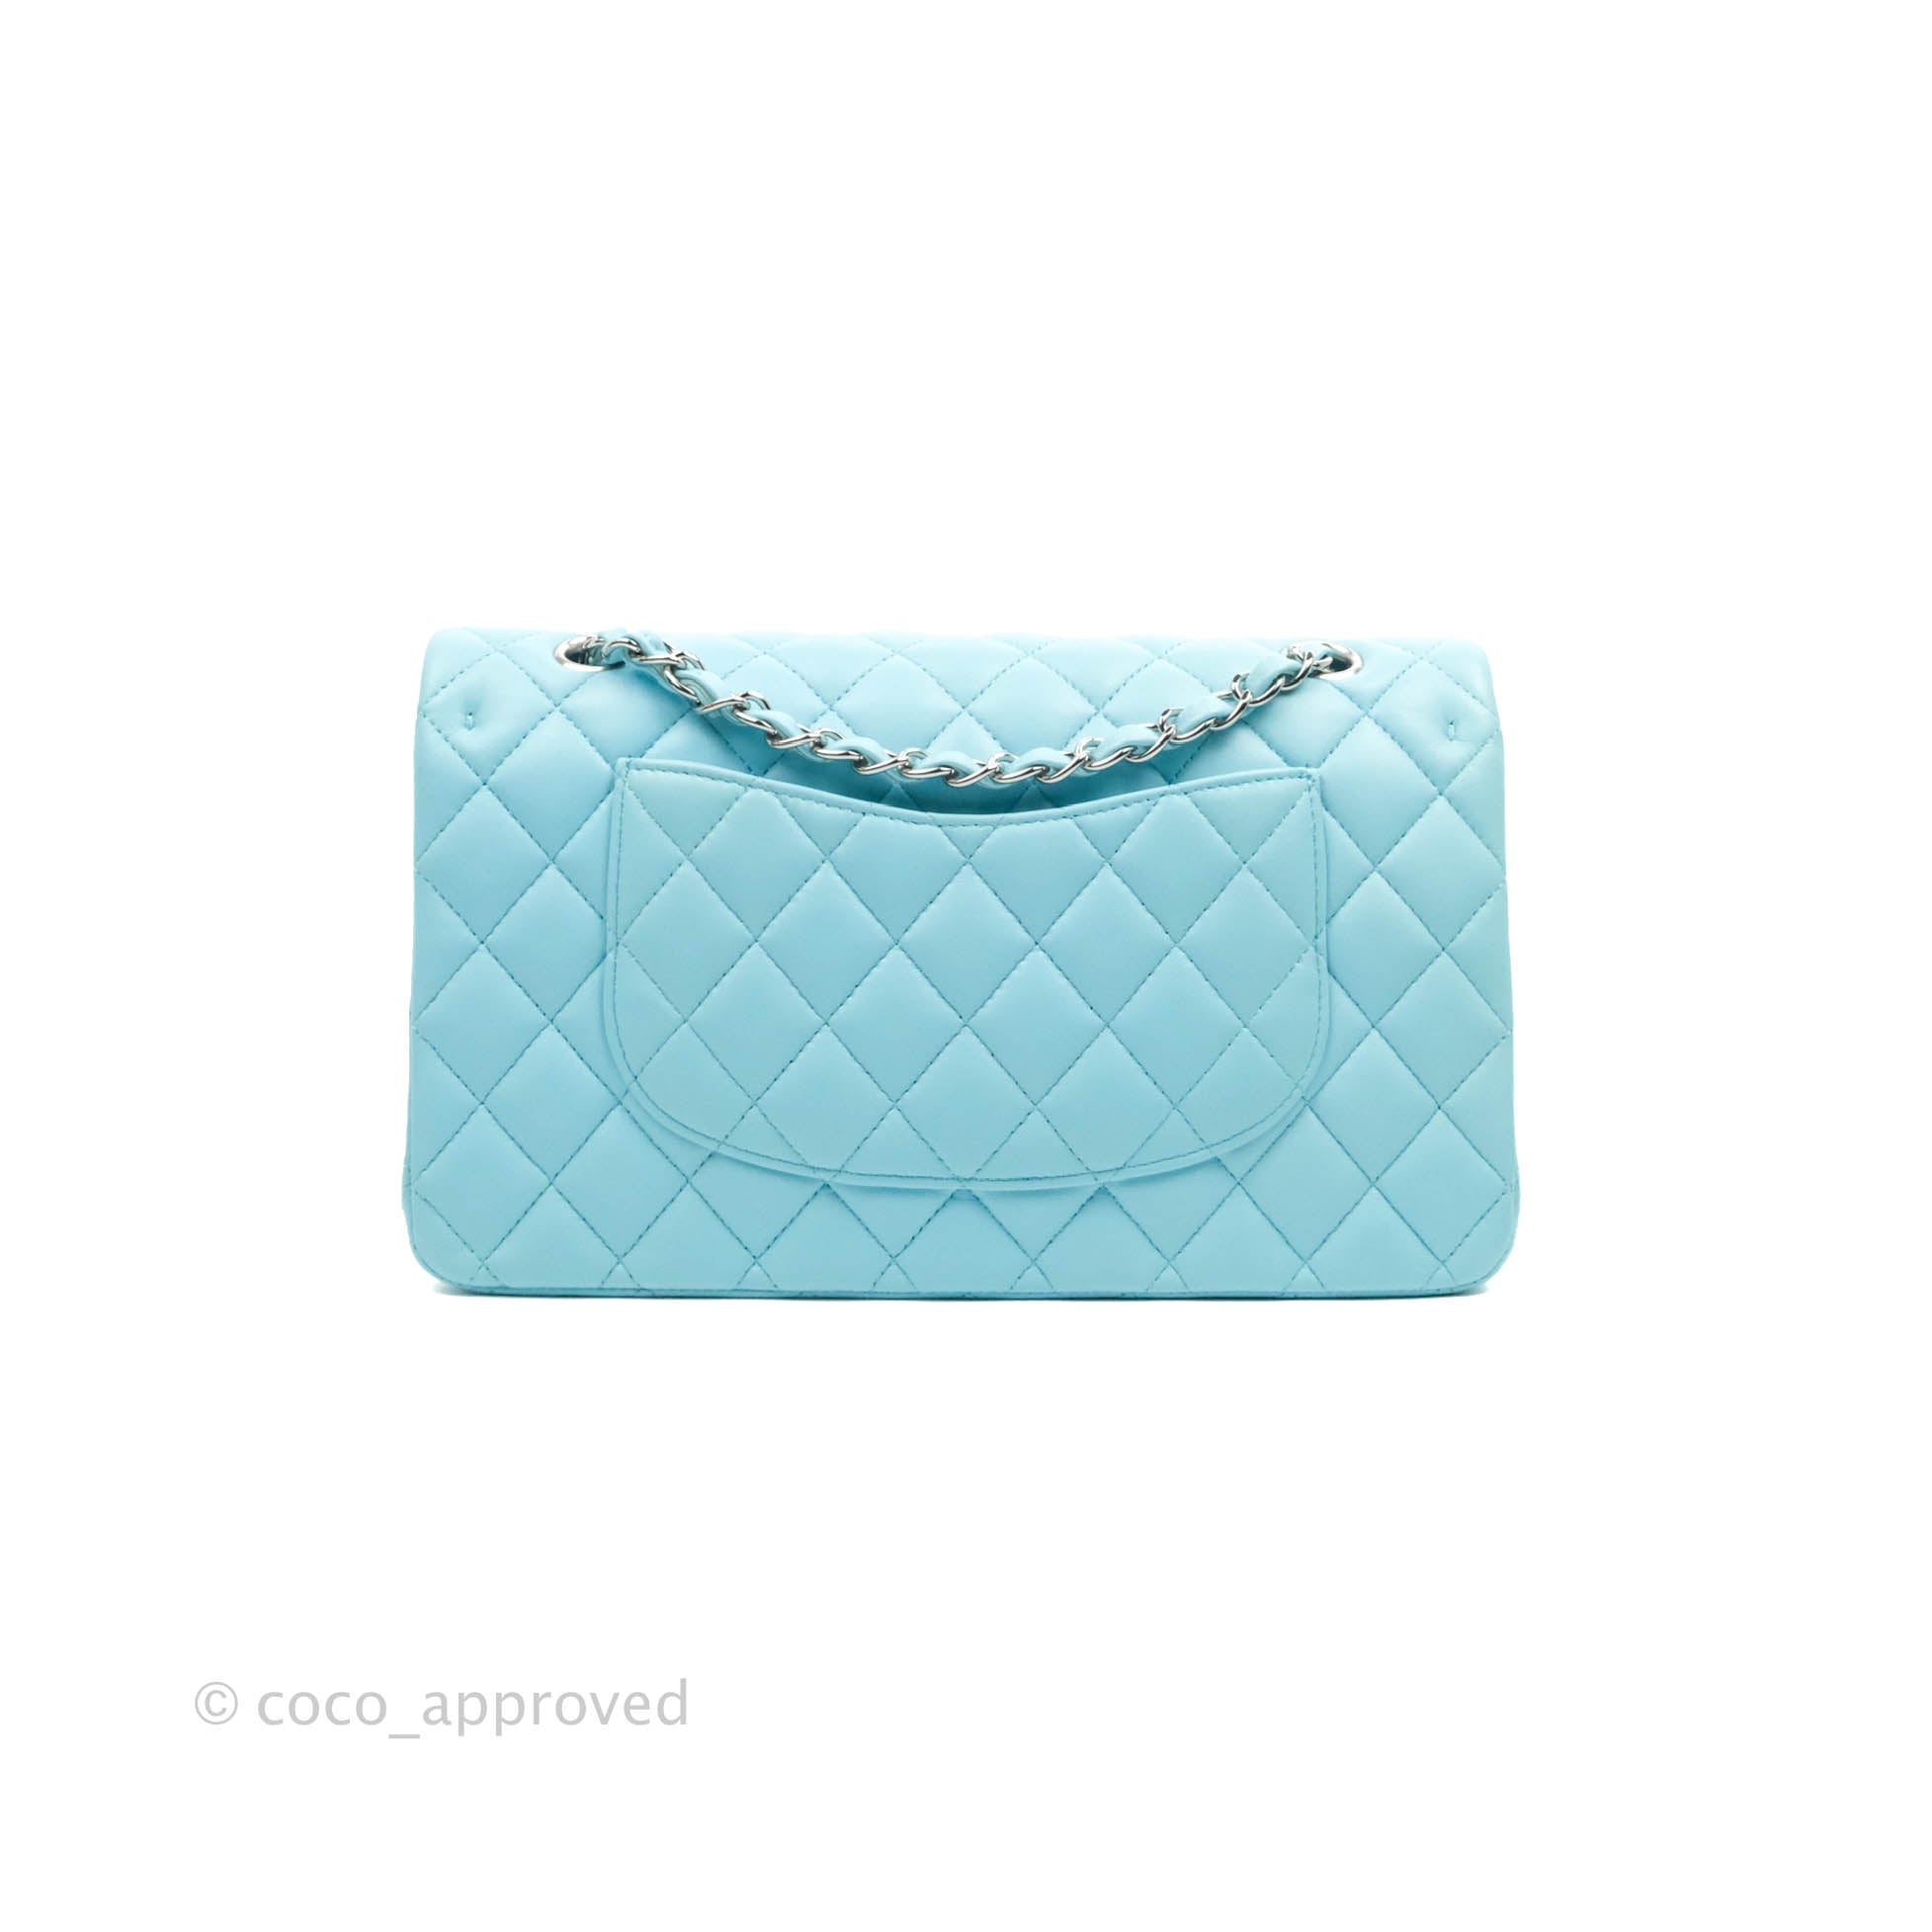 Chanel Colorama Flap Bag Quilted Watercolor Canvas Jumbo